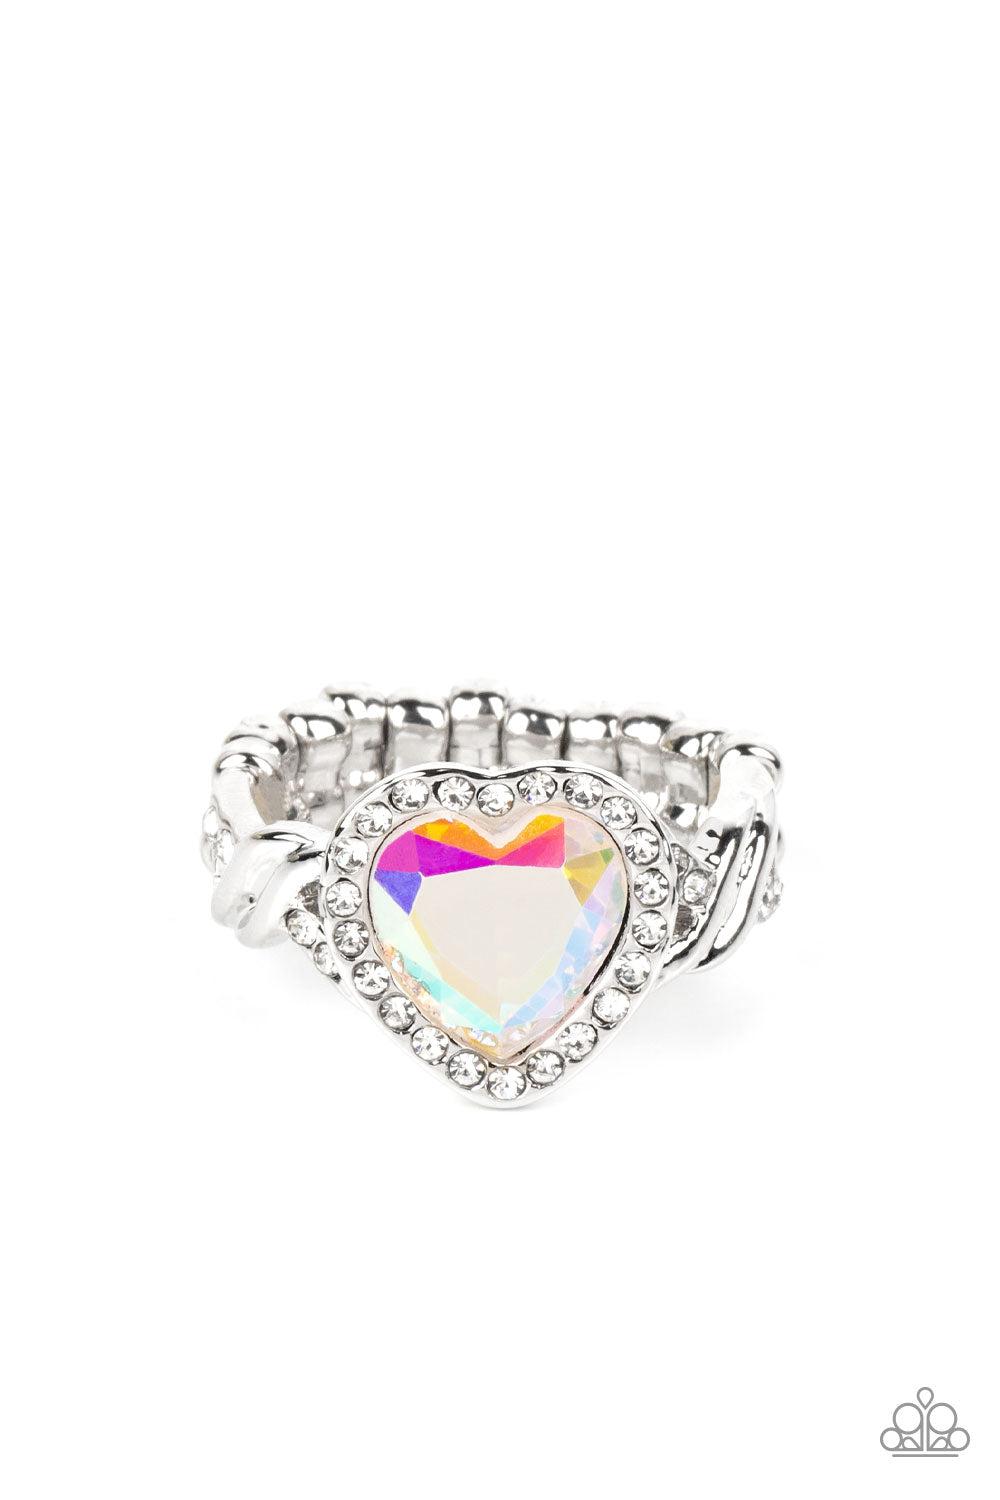 Committed to Cupid Multi Iridescent Rhinestone Heart Ring - Paparazzi Accessories- lightbox - CarasShop.com - $5 Jewelry by Cara Jewels